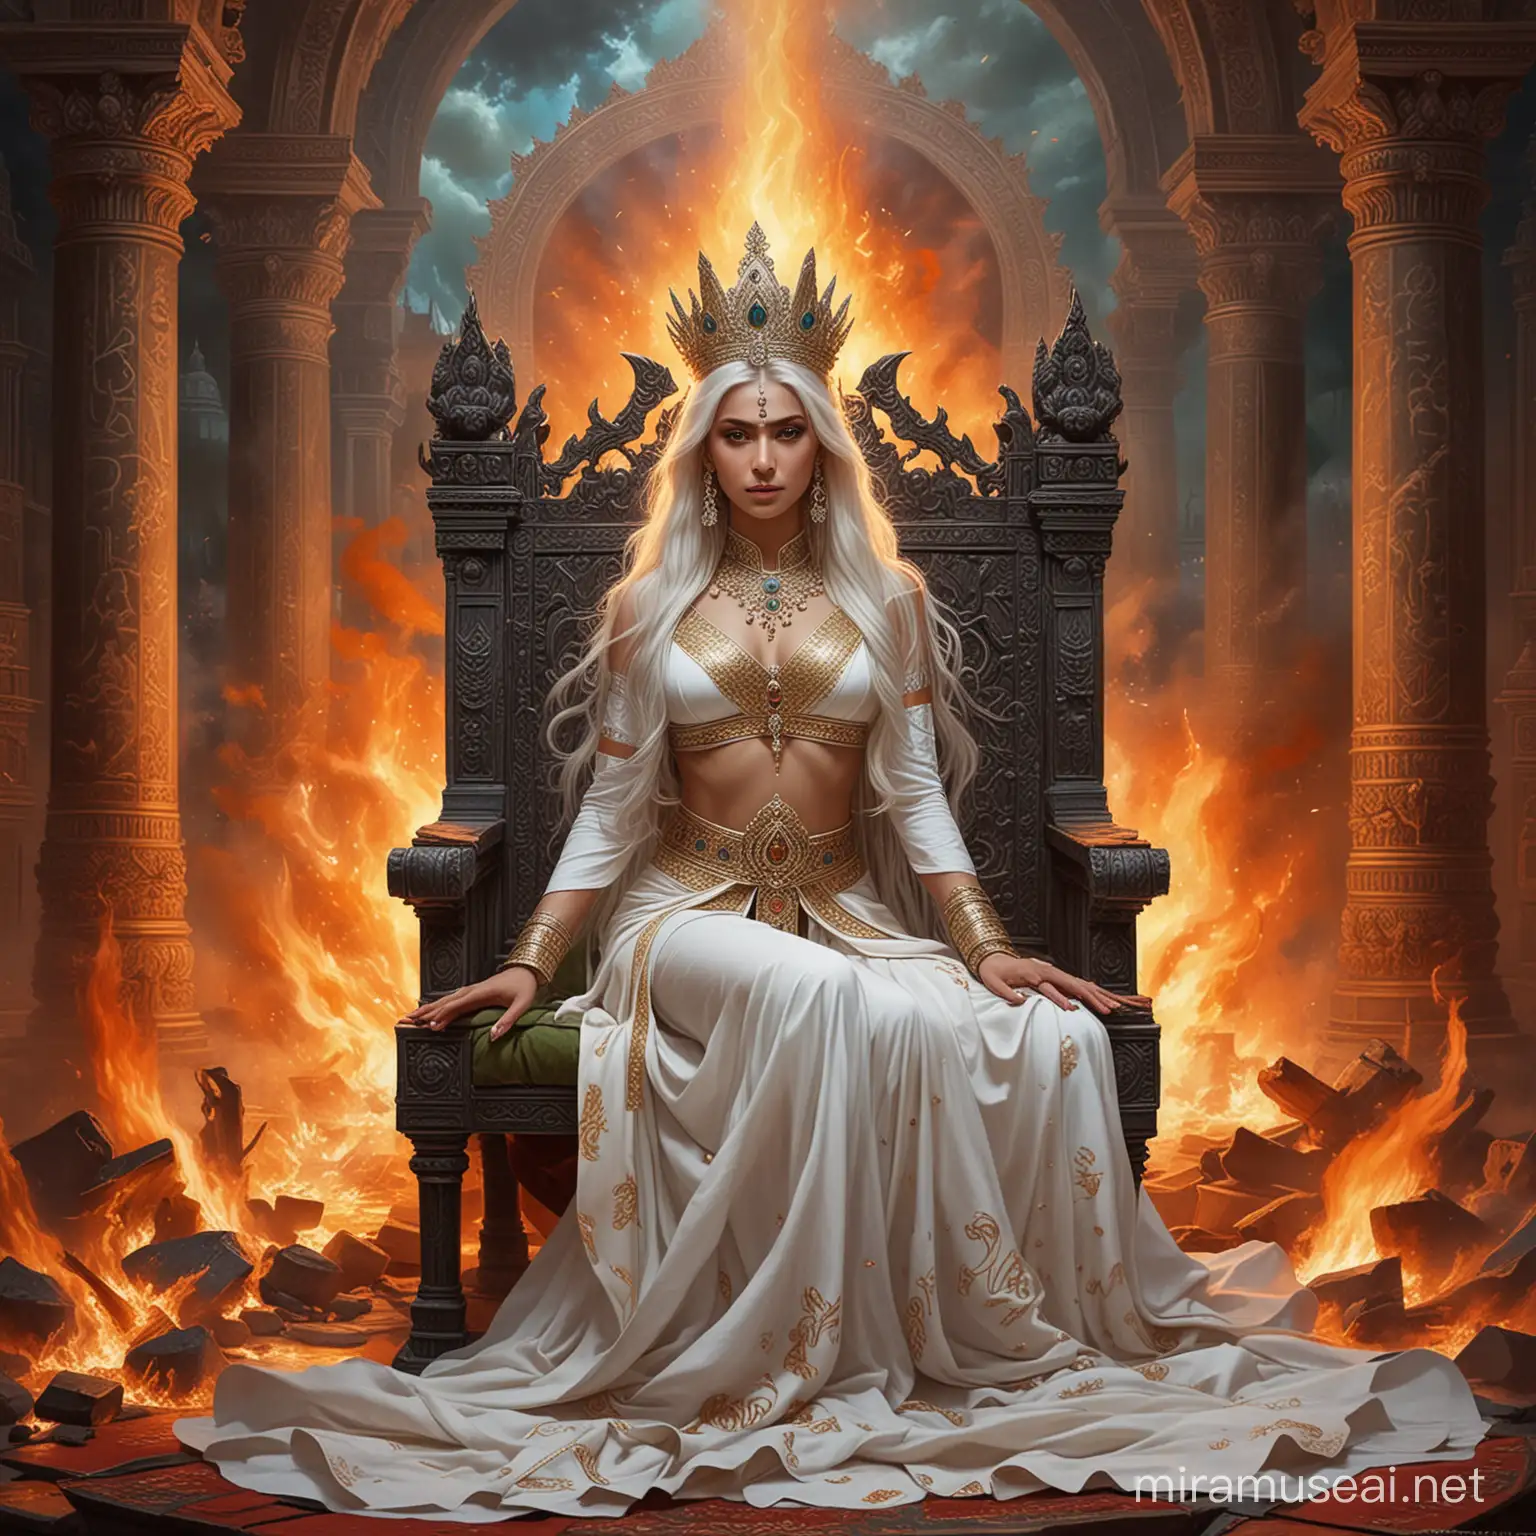 Majestic Hindu Empress Surrounded by Fire and Deities